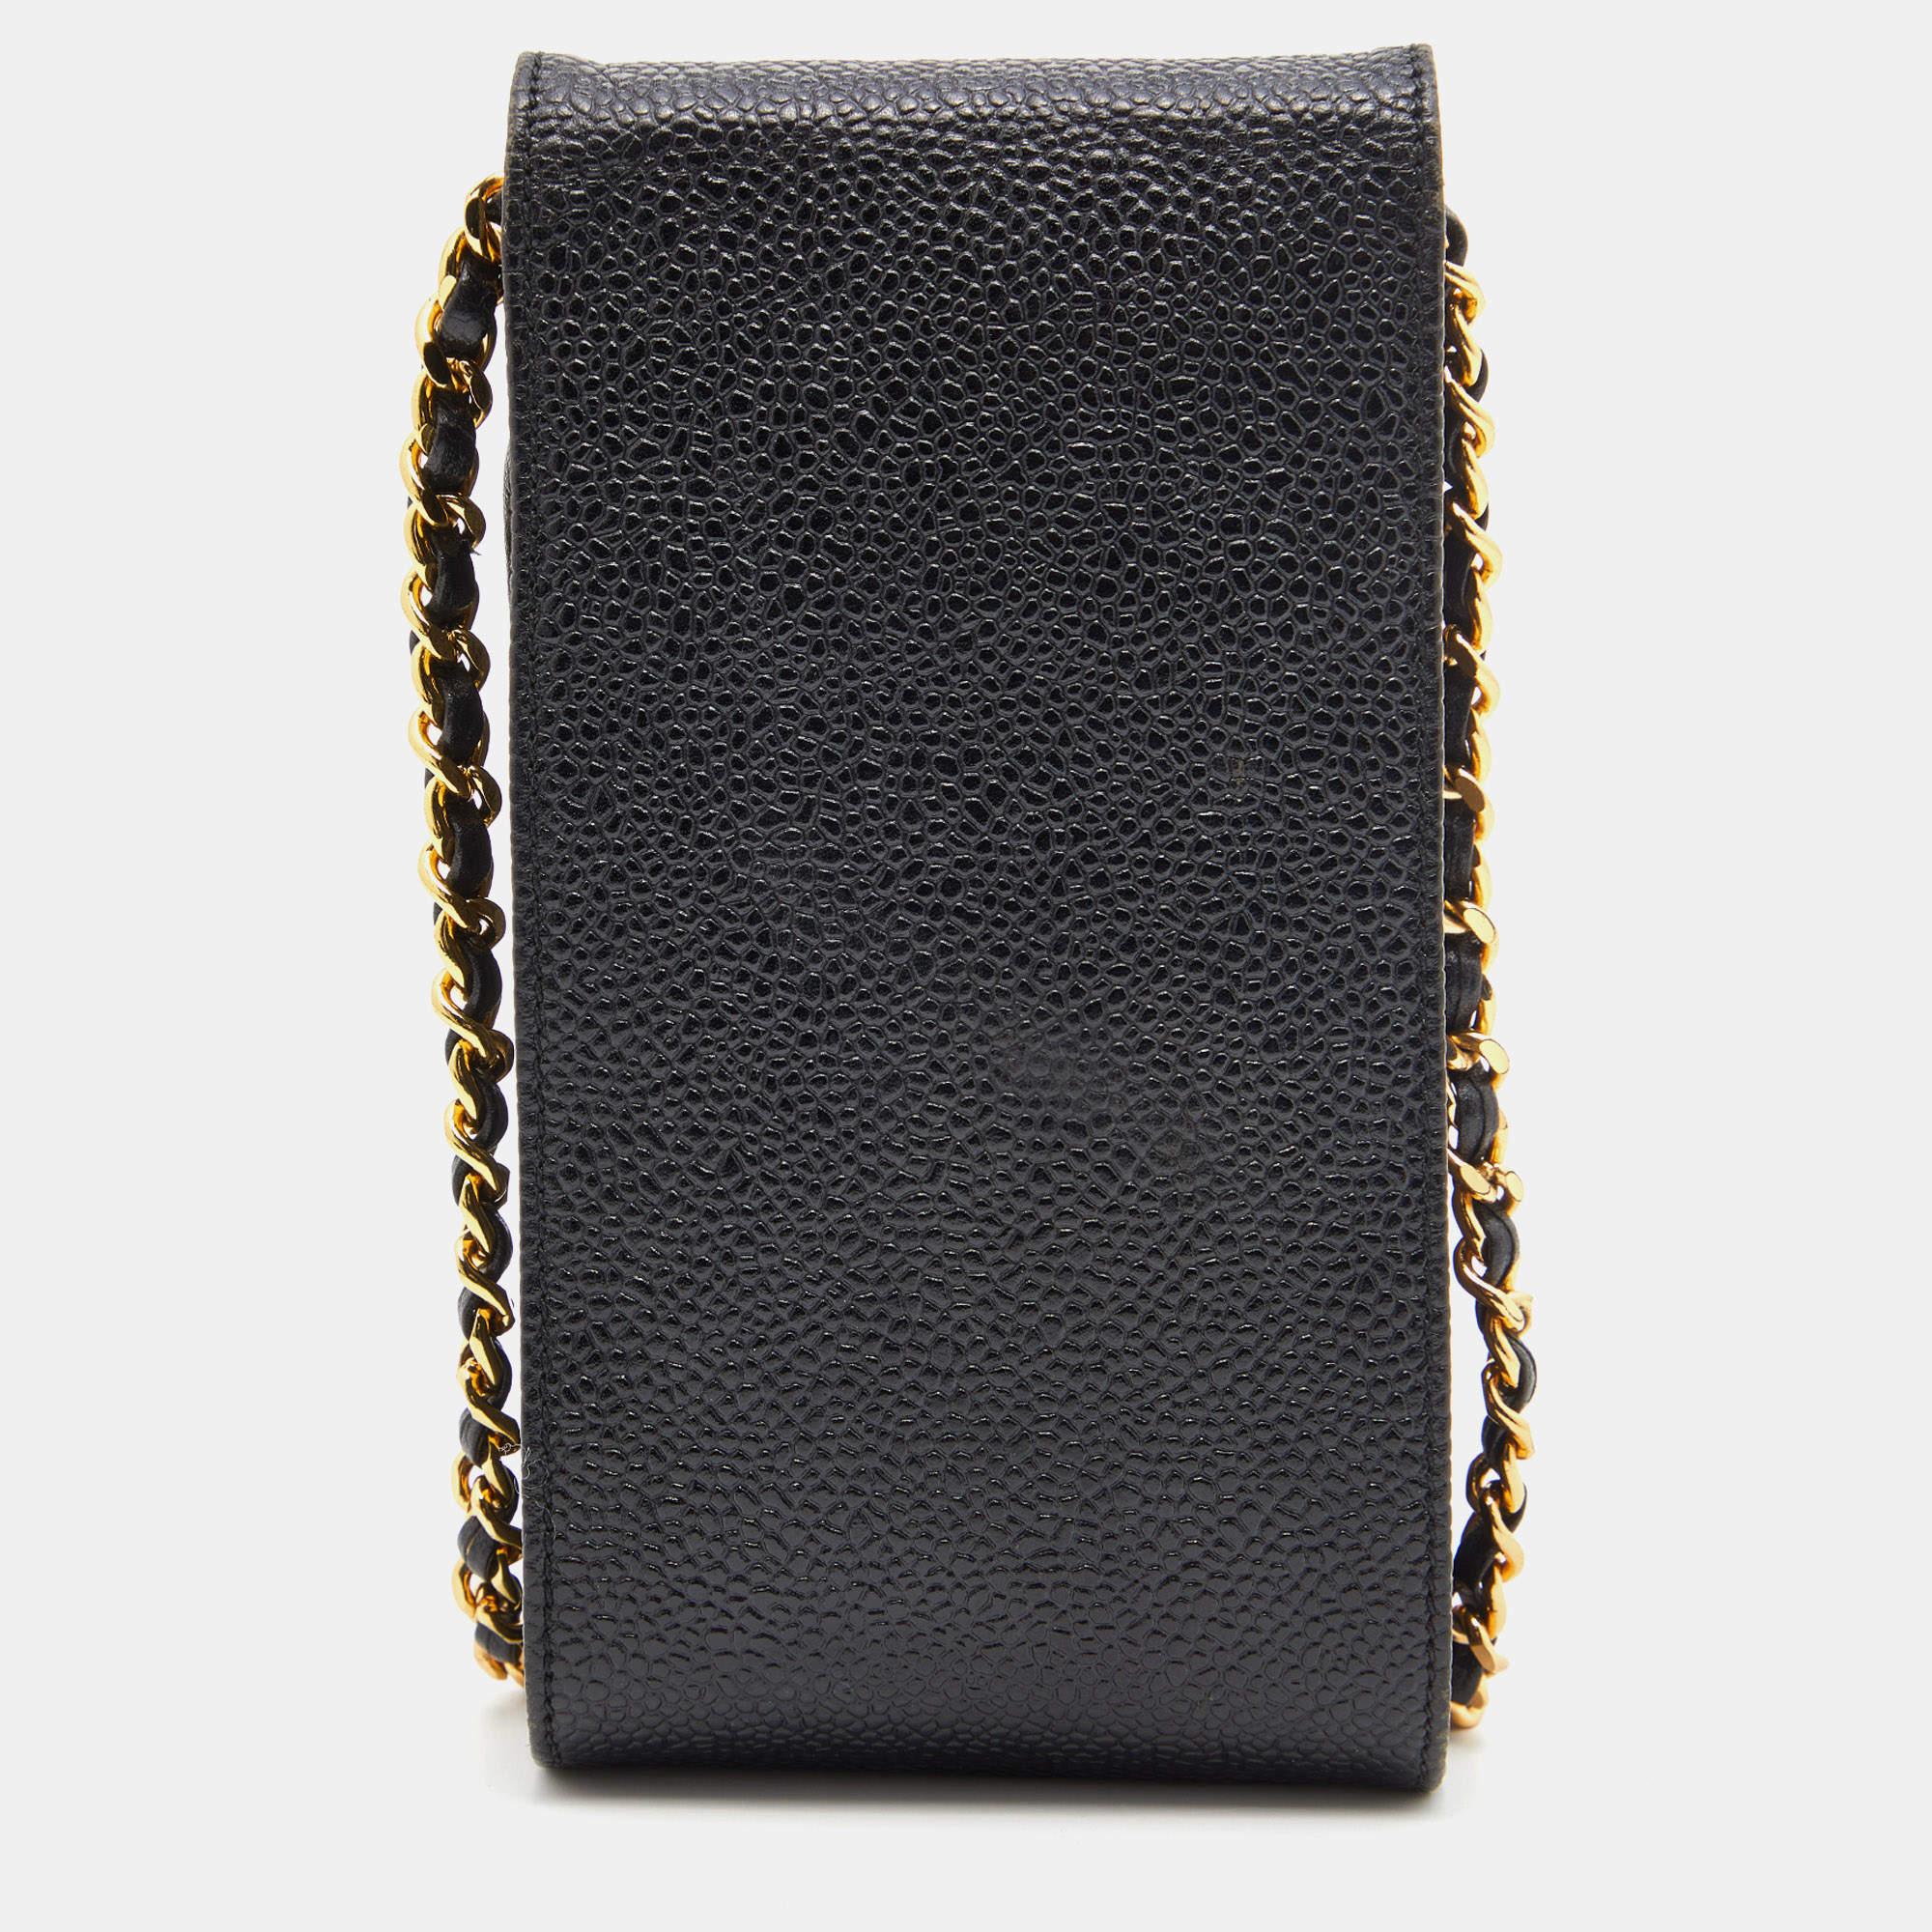 Chanel Black Caviar Quilted Leather Vintage Flap Chain Phone Case 4